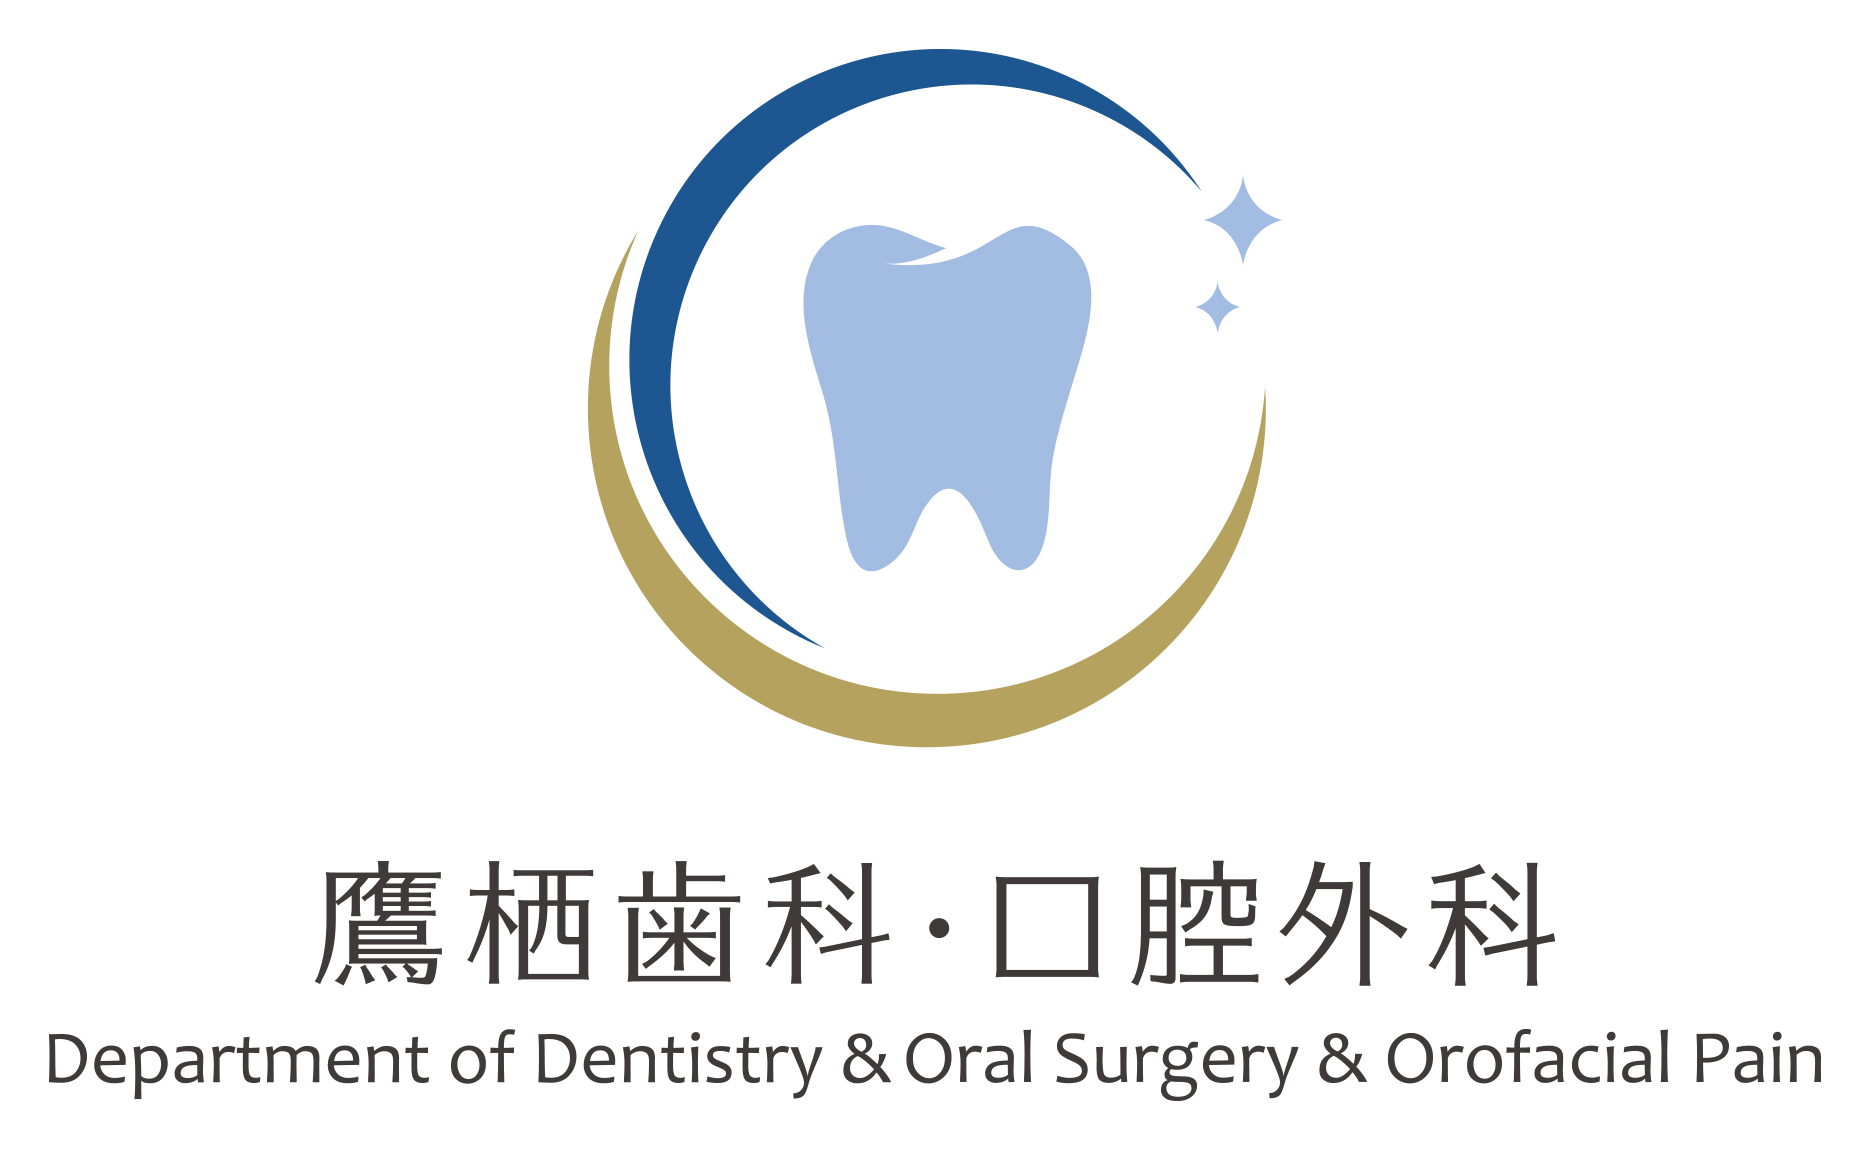  Takasu Dental Clinic  「Reservation required」